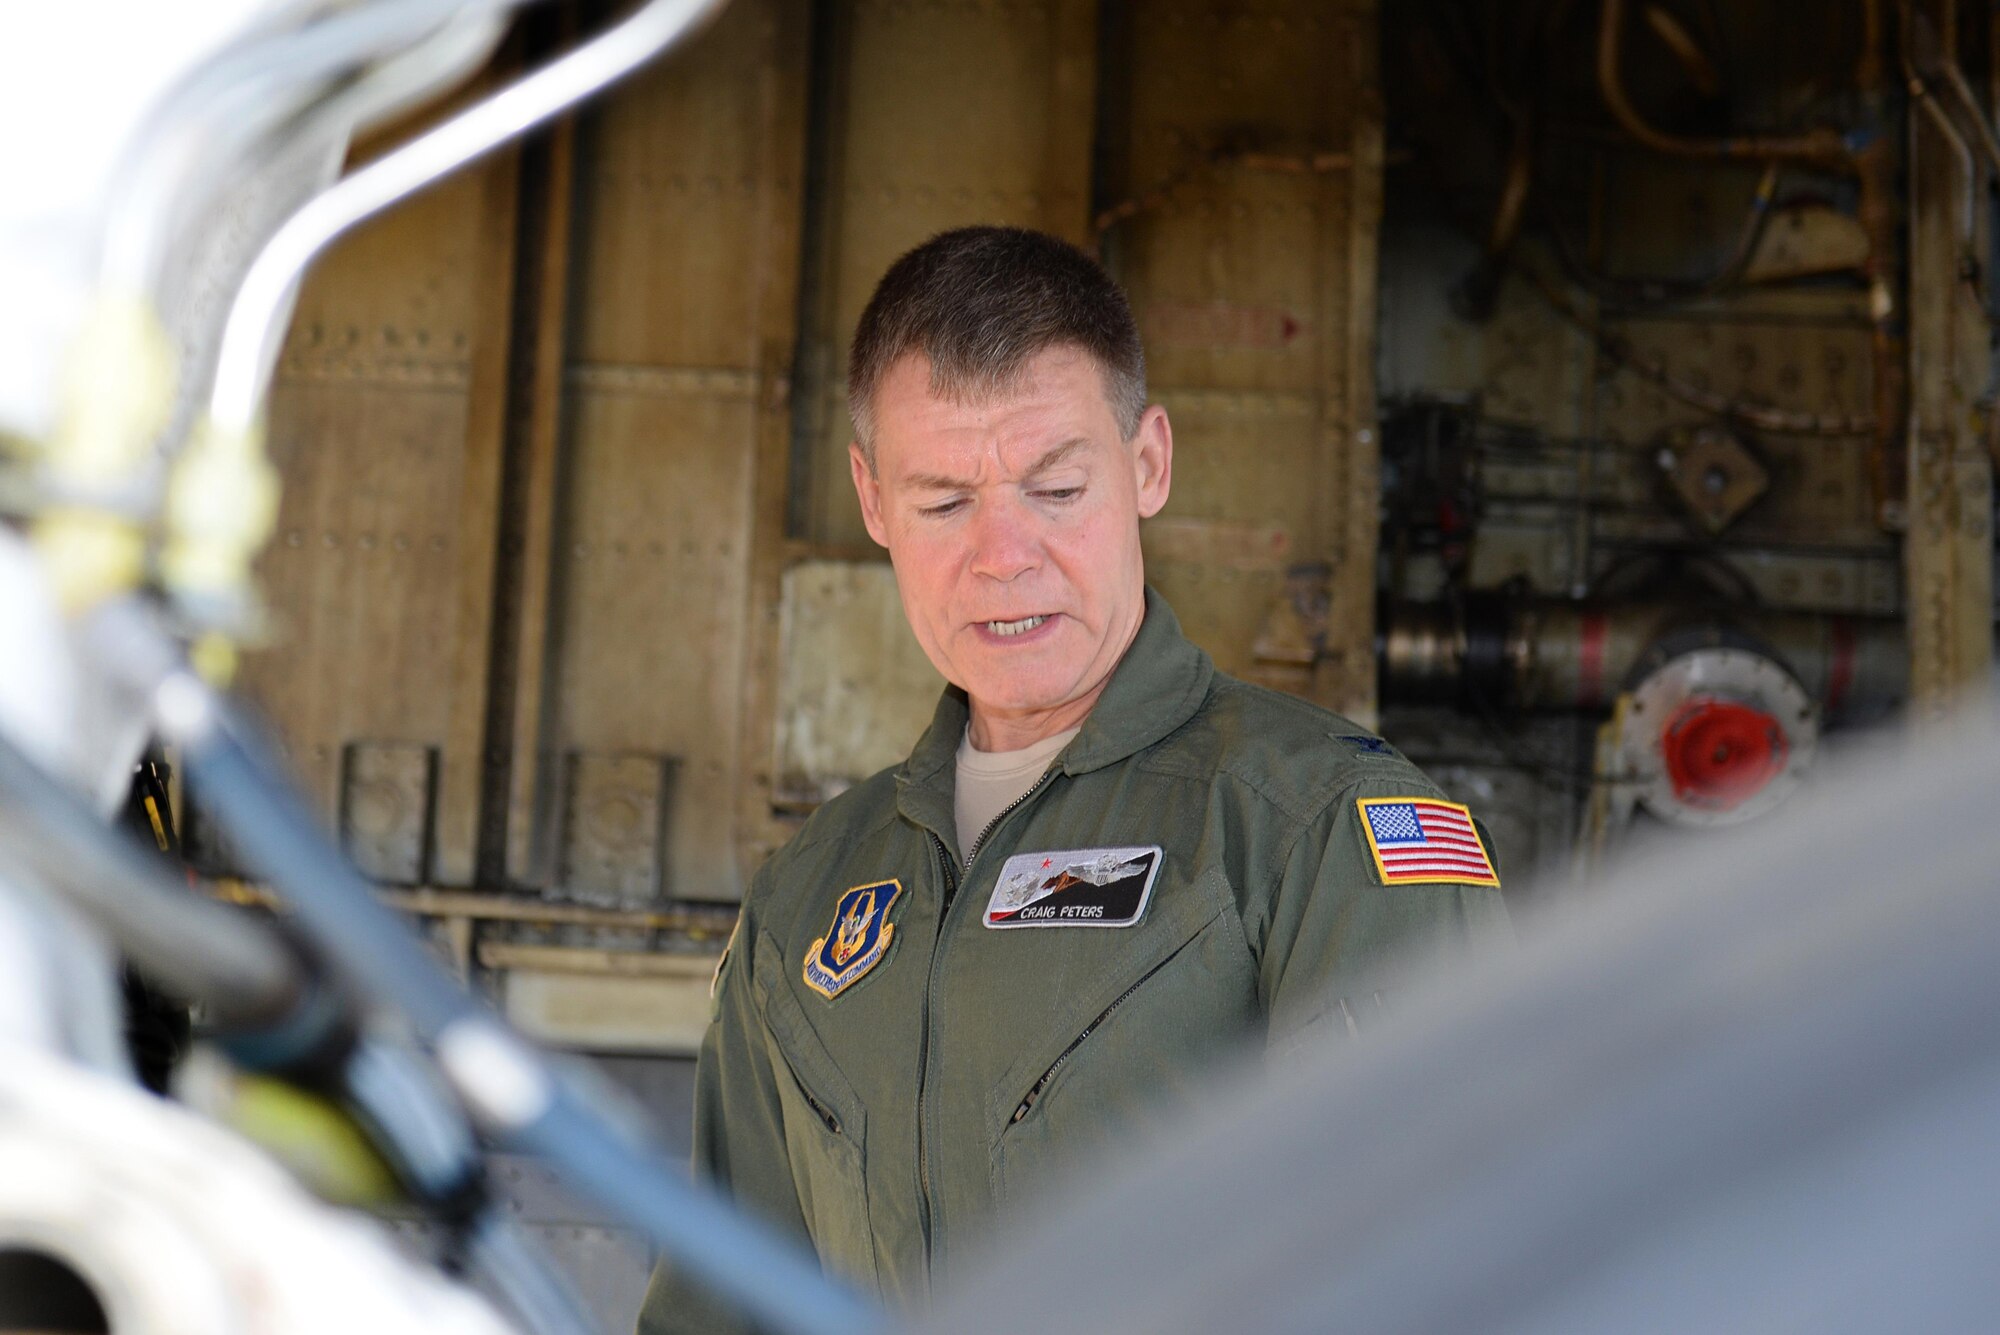 U.S. Air Force Col. Craig Peters, 940th Air Refueling Wing commander, preforms a pre-flight safety check on a U.S. Air Force KC-135 Stratotanker refueling aircraft, March 17, 2017, at Altus Air Force Base, Oklahoma. Peters participated in a refueling training mission where his KC-135 refueled a U.S. Air Force C-17 cargo aircraft which his son, U.S. Air Force Senior Airman Brendin Peters, 317th Airlift Squadron loadmaster, was training aboard. (U.S. Air Force photo by Airman 1st Class Cody Dowell/Released)

